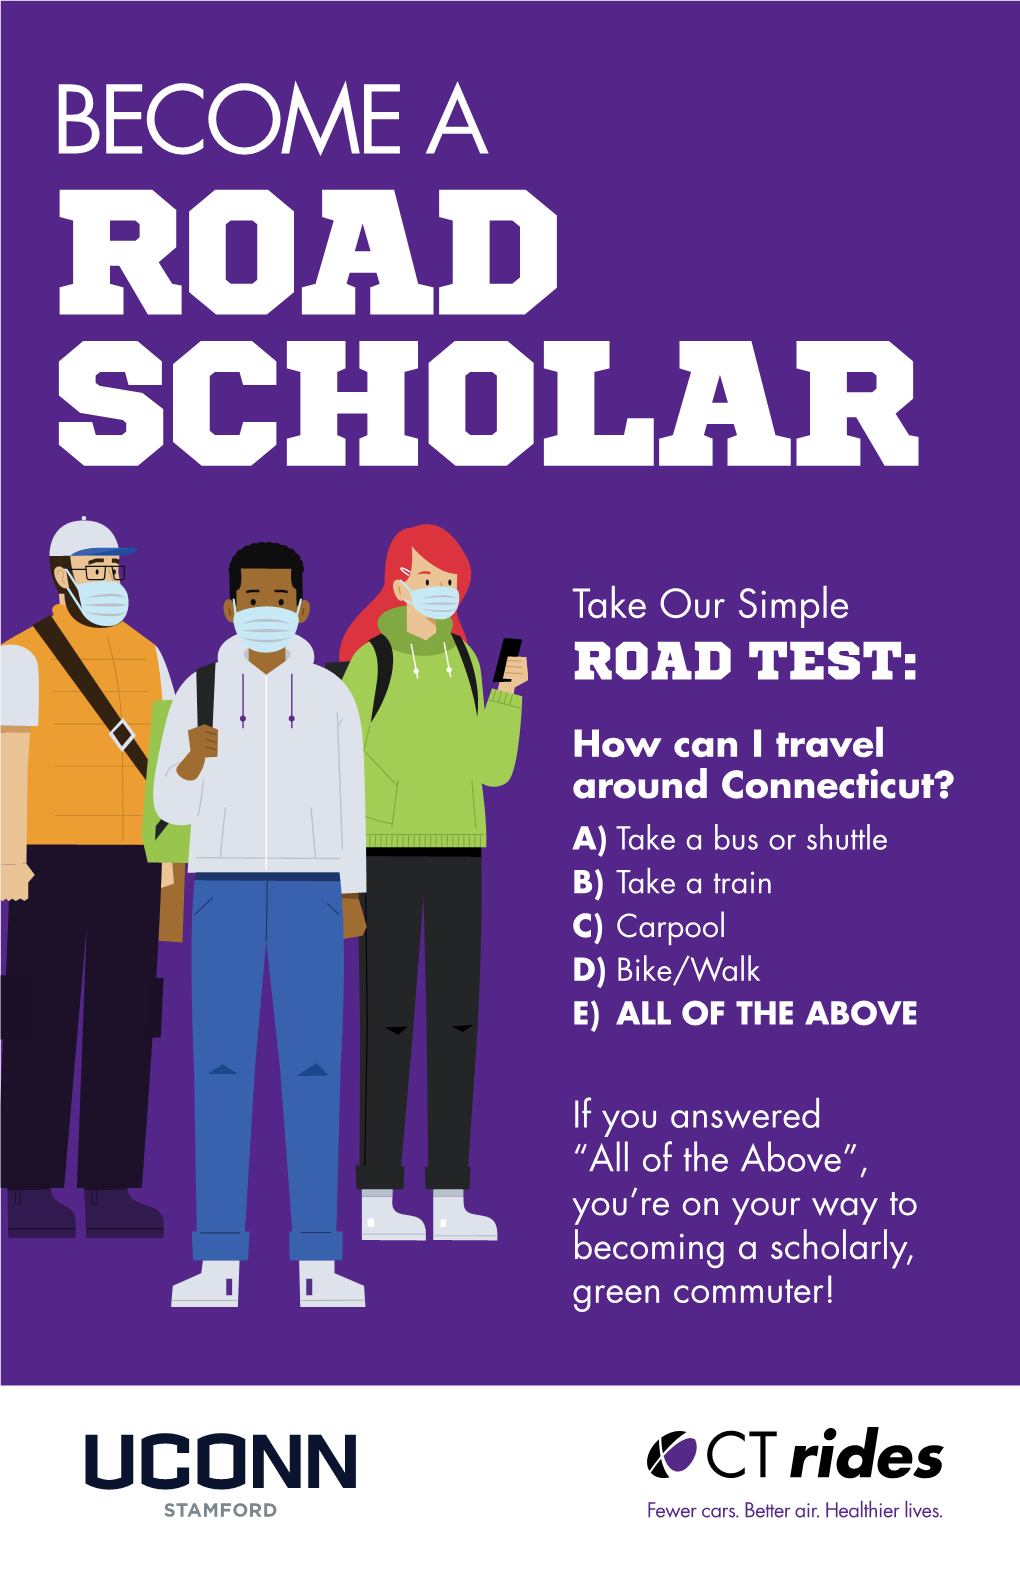 Become a ROAD SCHOLAR